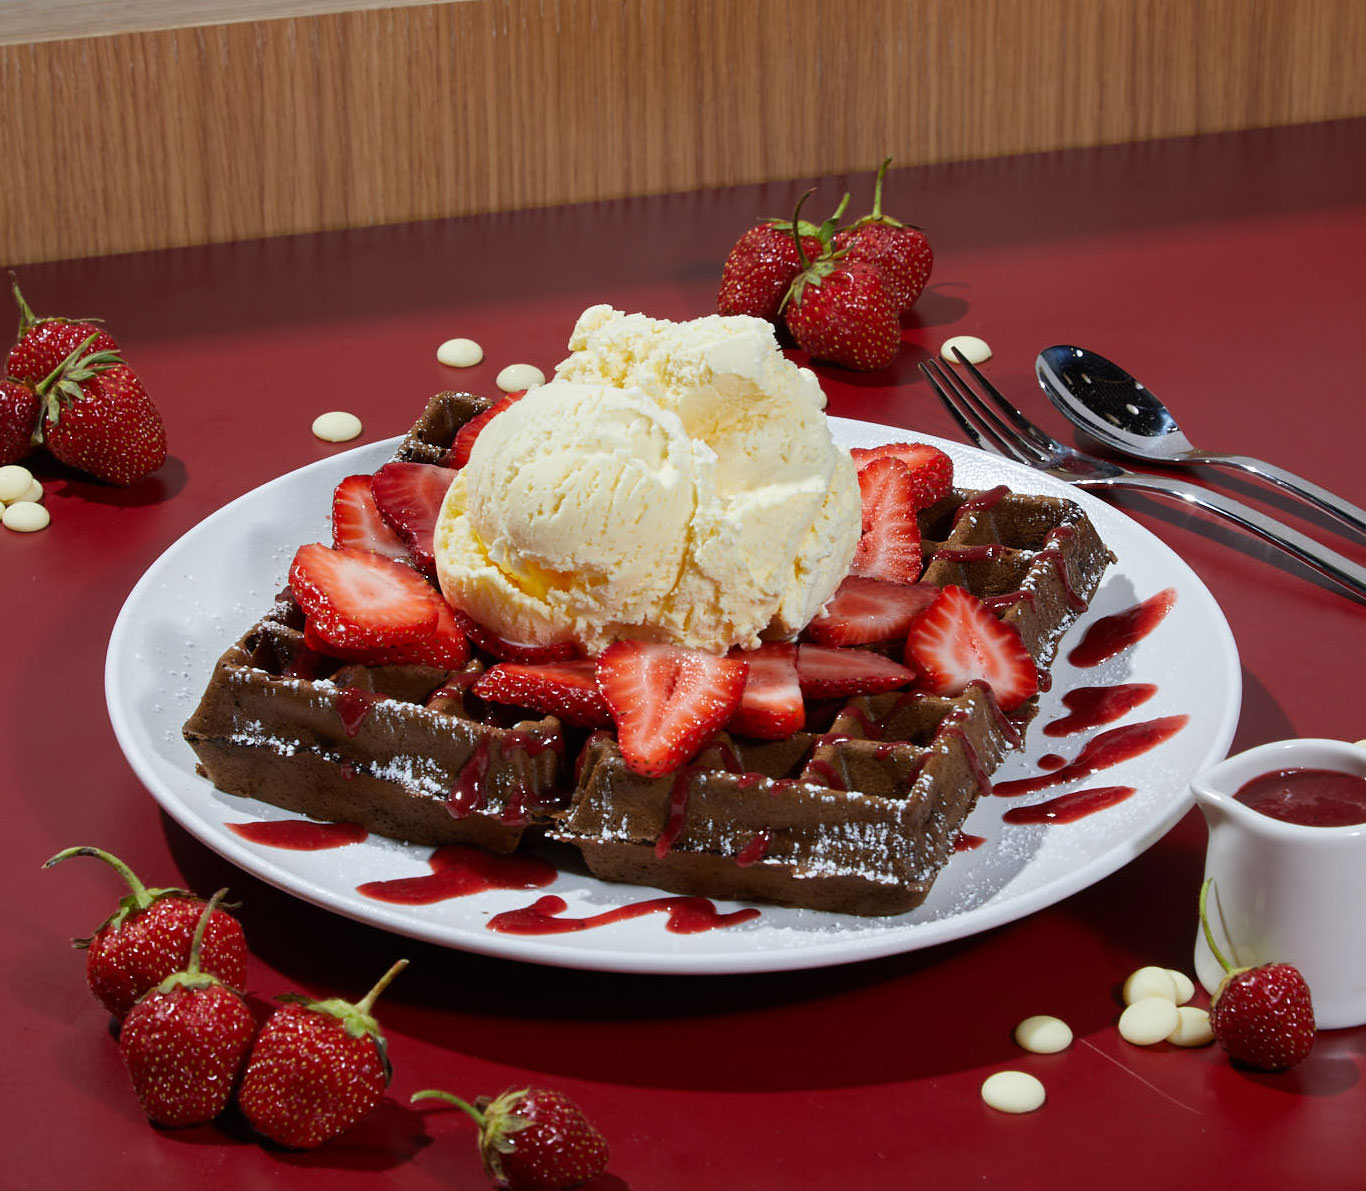 Chocolate waffle topped with strawberries and ice cream.